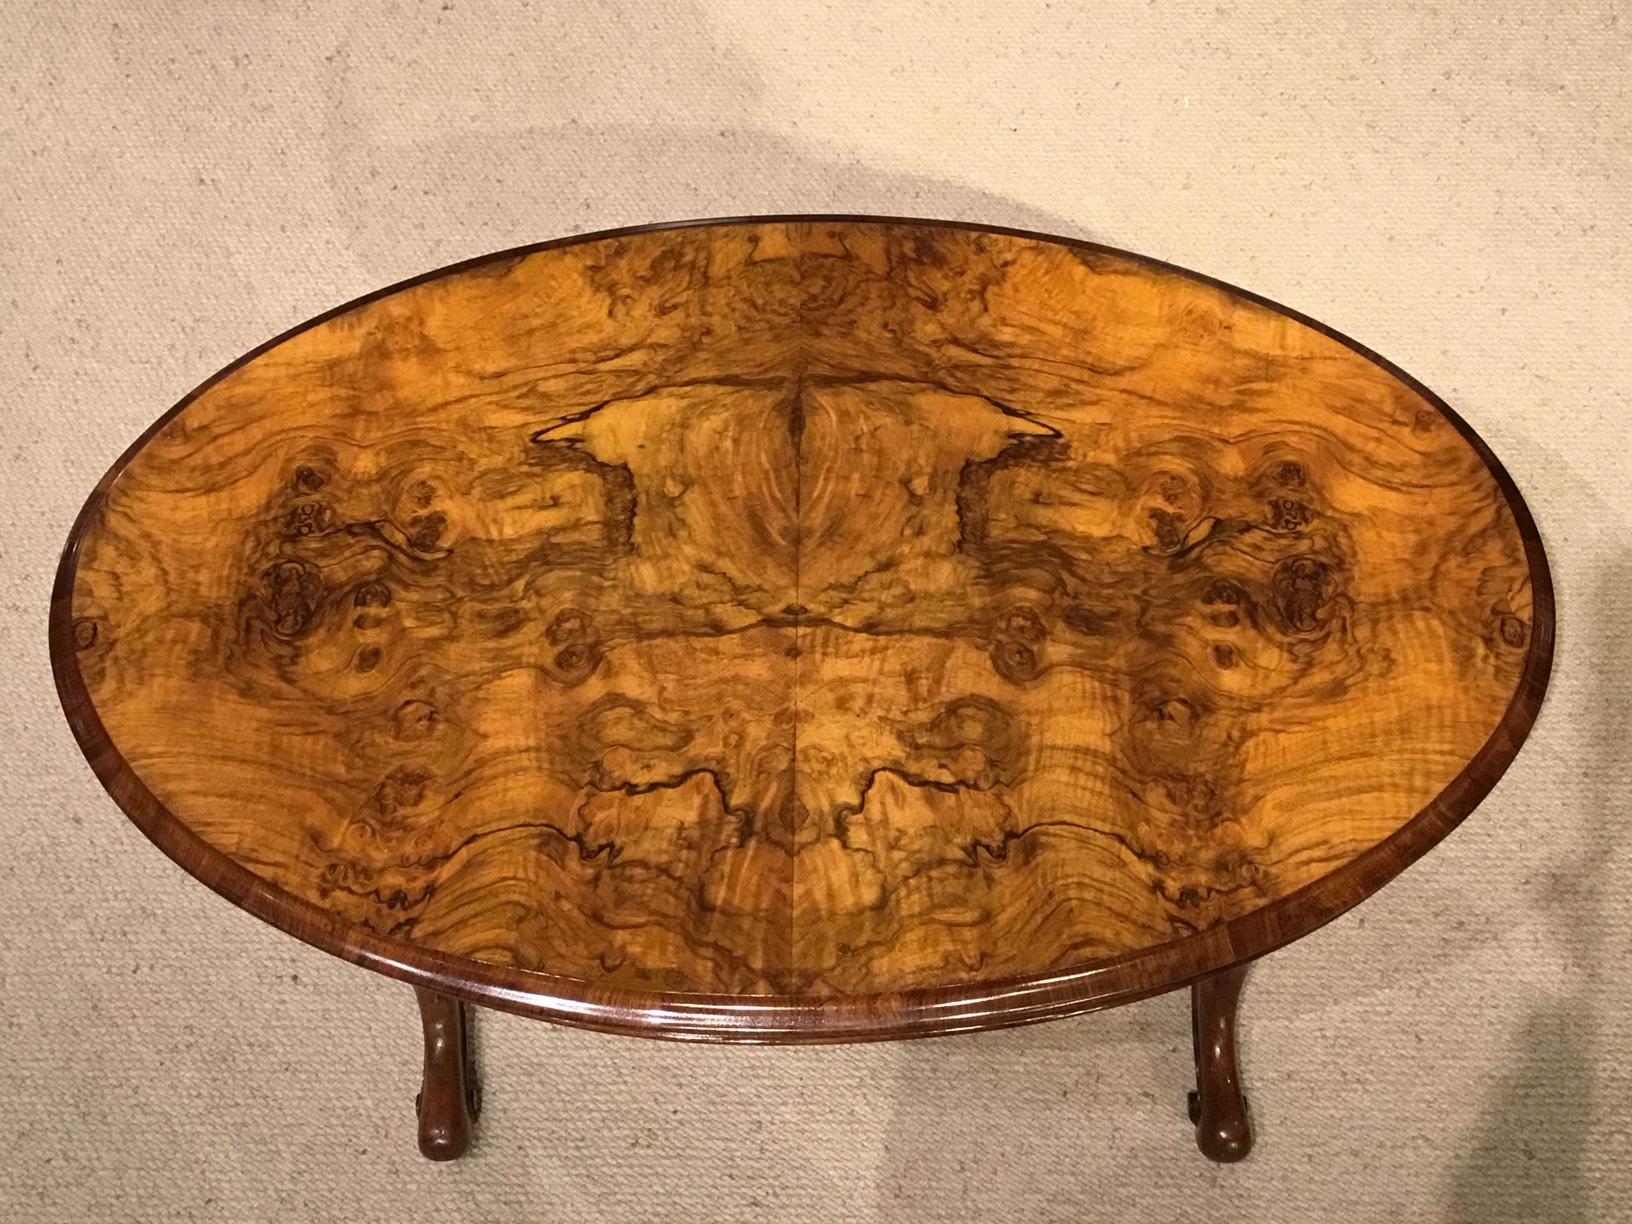 An unusual burr walnut and walnut Victorian period oval coffee table with slide. Having an oval top veneered in beautifully figured burr walnut with an unusual sliding shelf with an inset green gilt tooled leather. Supported on turned and carved